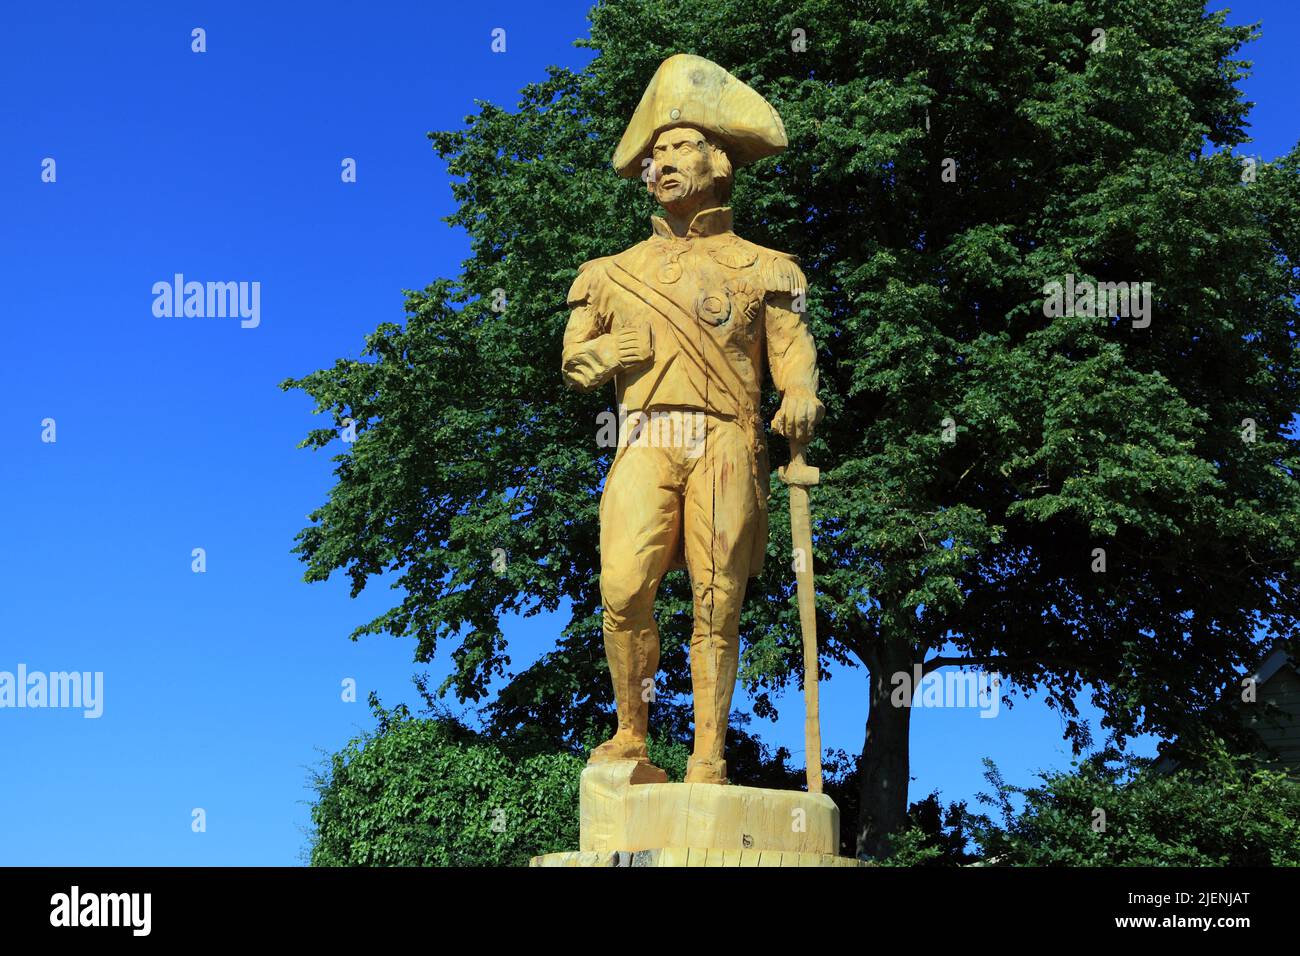 Admiral Lord Horatio Nelson, wood sculpture, carving, Burnham Thorpe,  by chainsaw artist Henry Hepworth-Smith, from Norwegian Maple tree, Norfolk Stock Photo